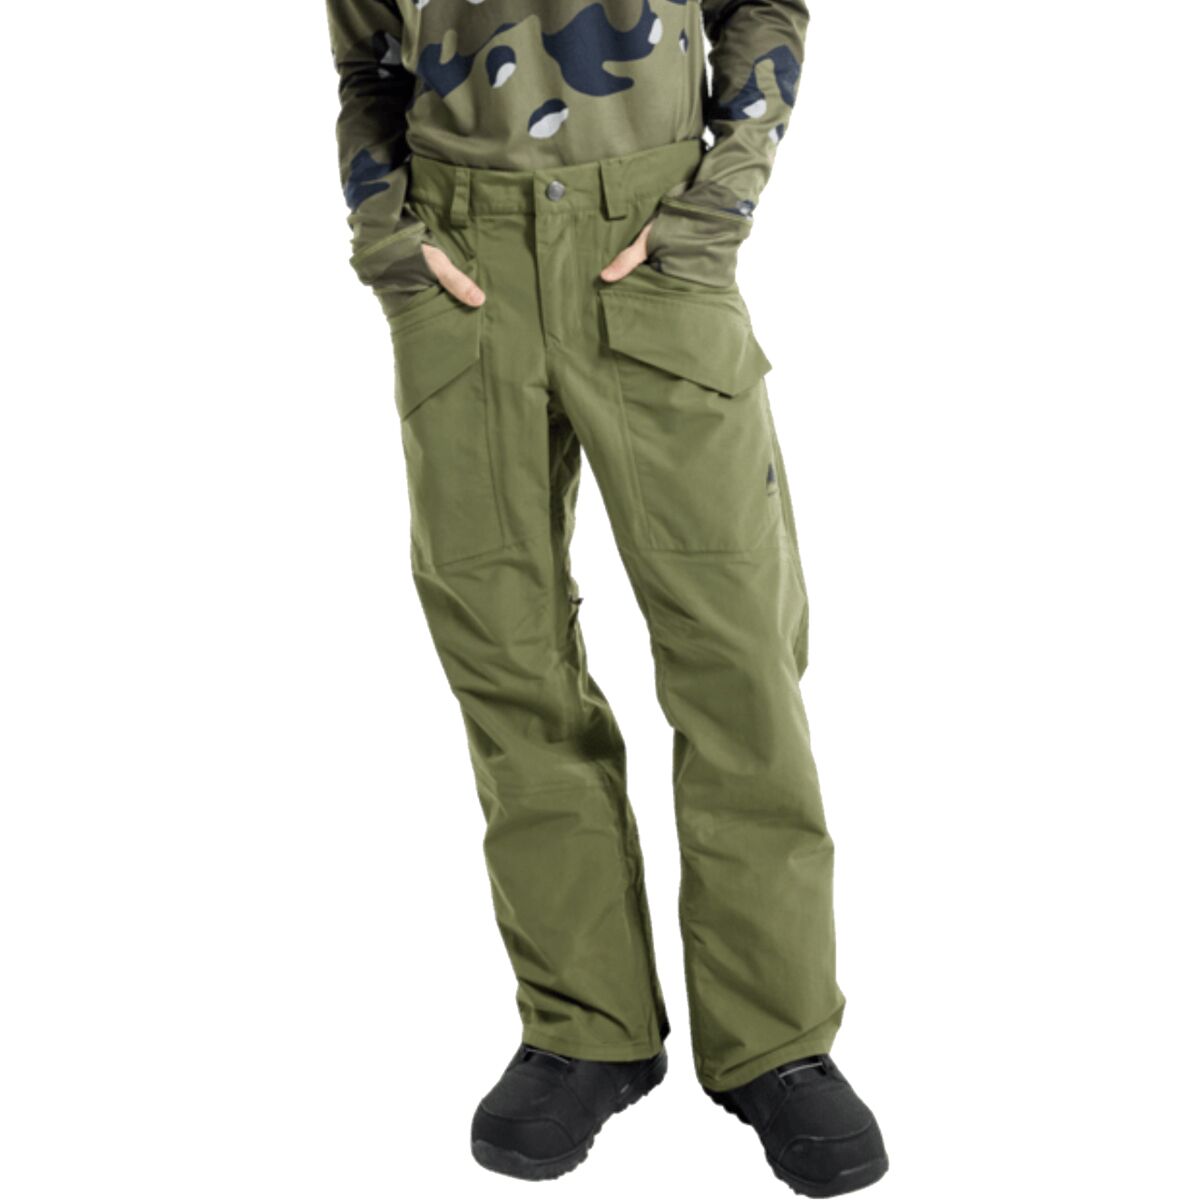 Covert 2.0 Insulated Pant - Men